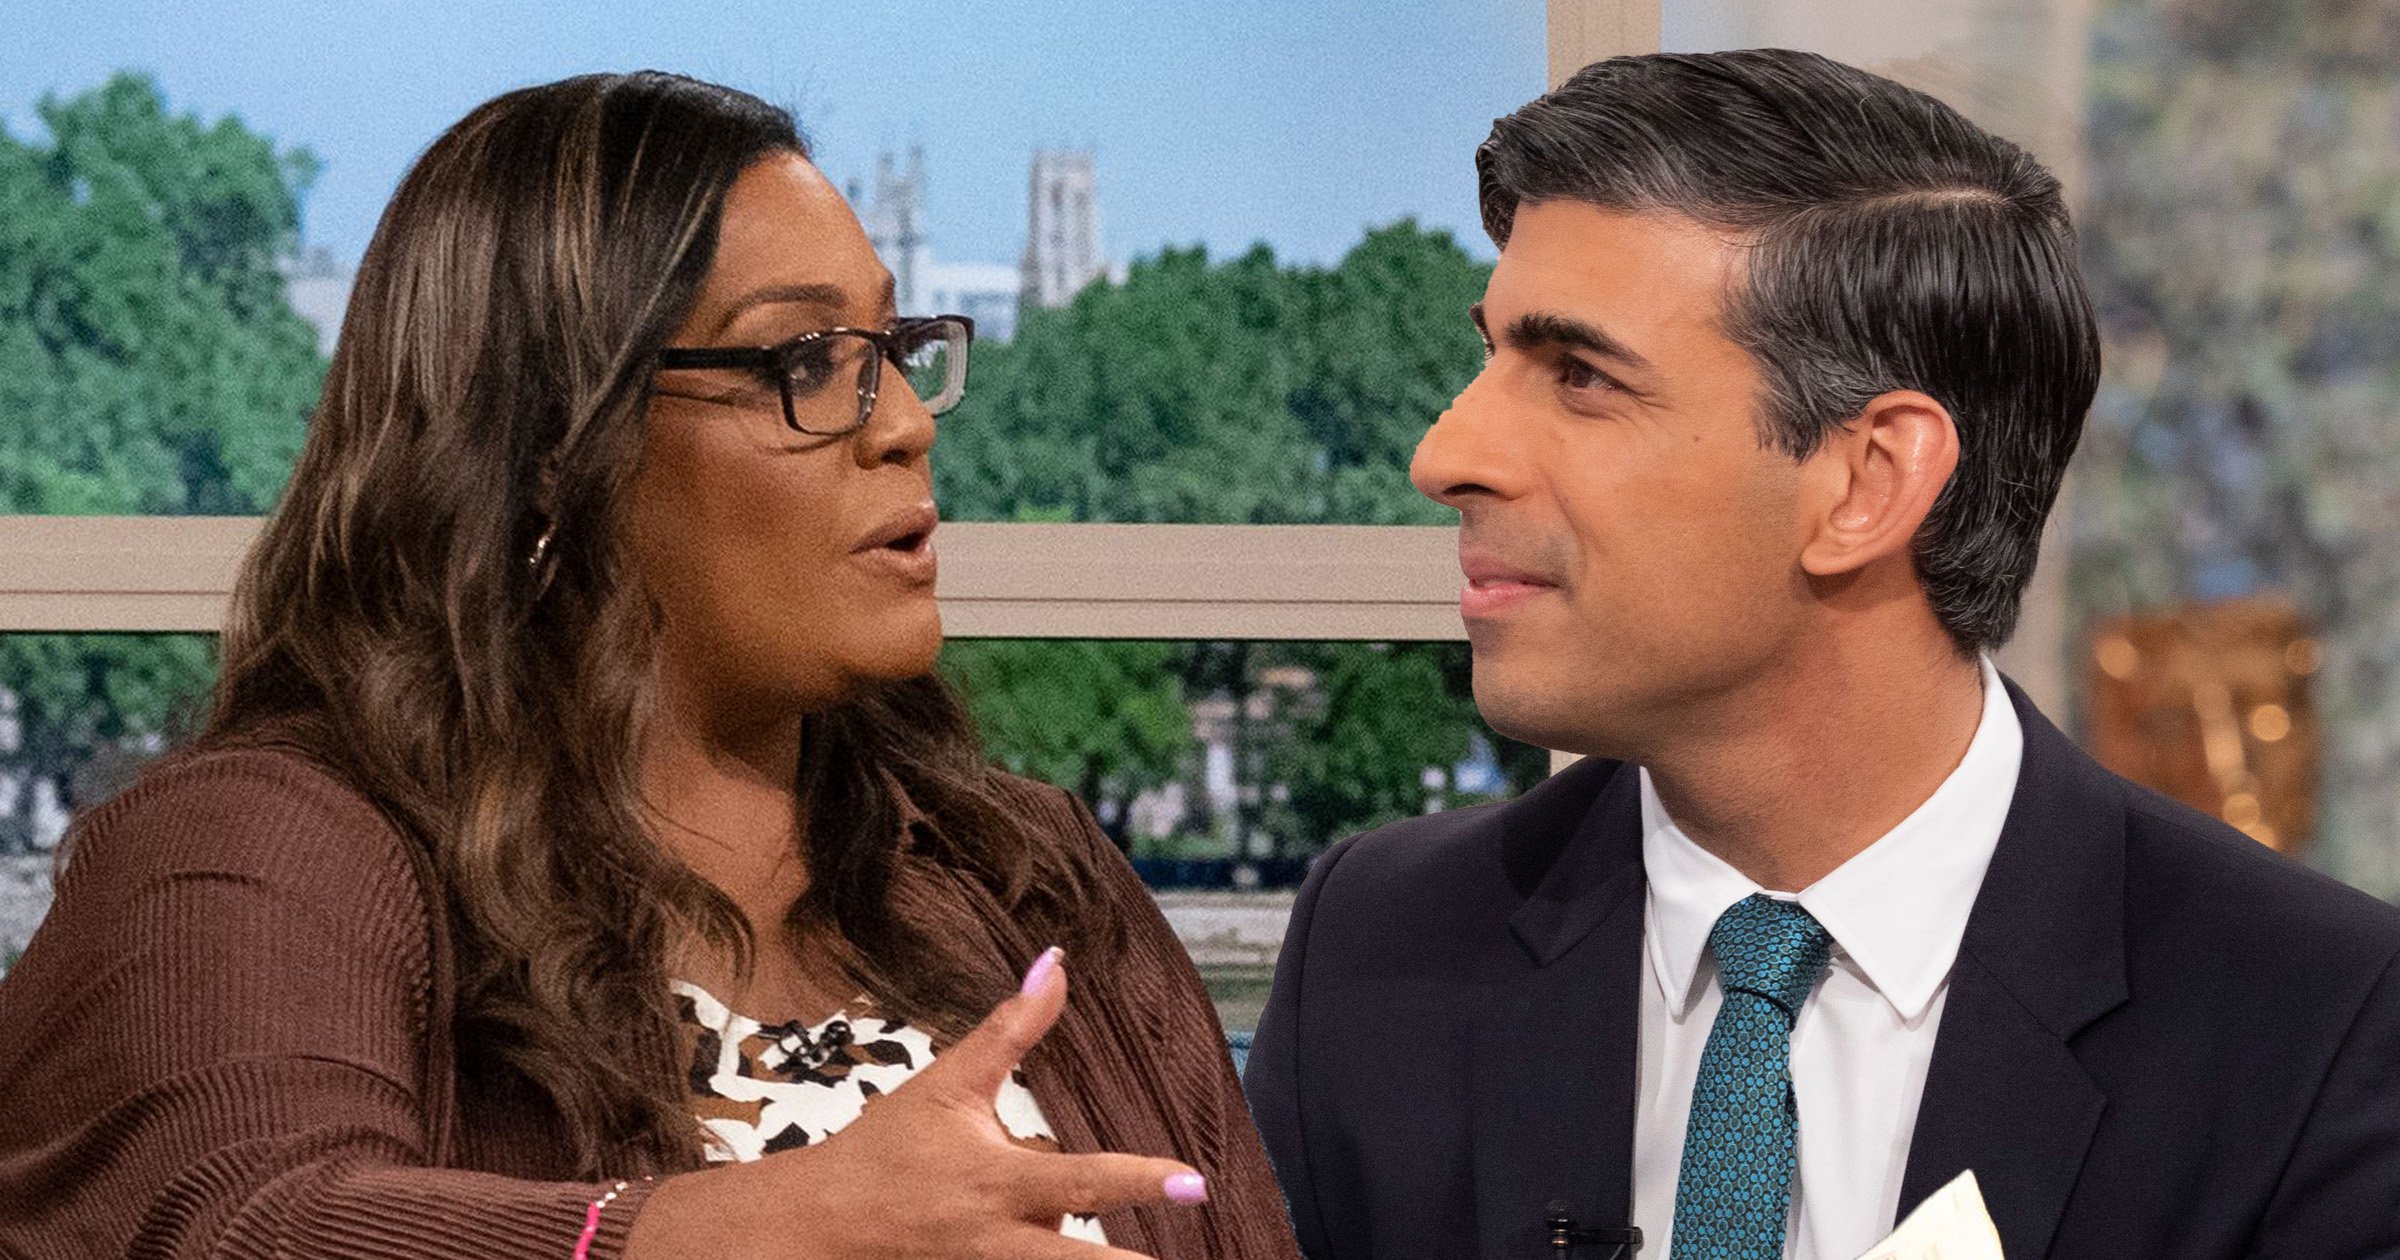 Alison Hammond ‘deletes Rishi Sunak tweet’ after backlash from This Morning viewers